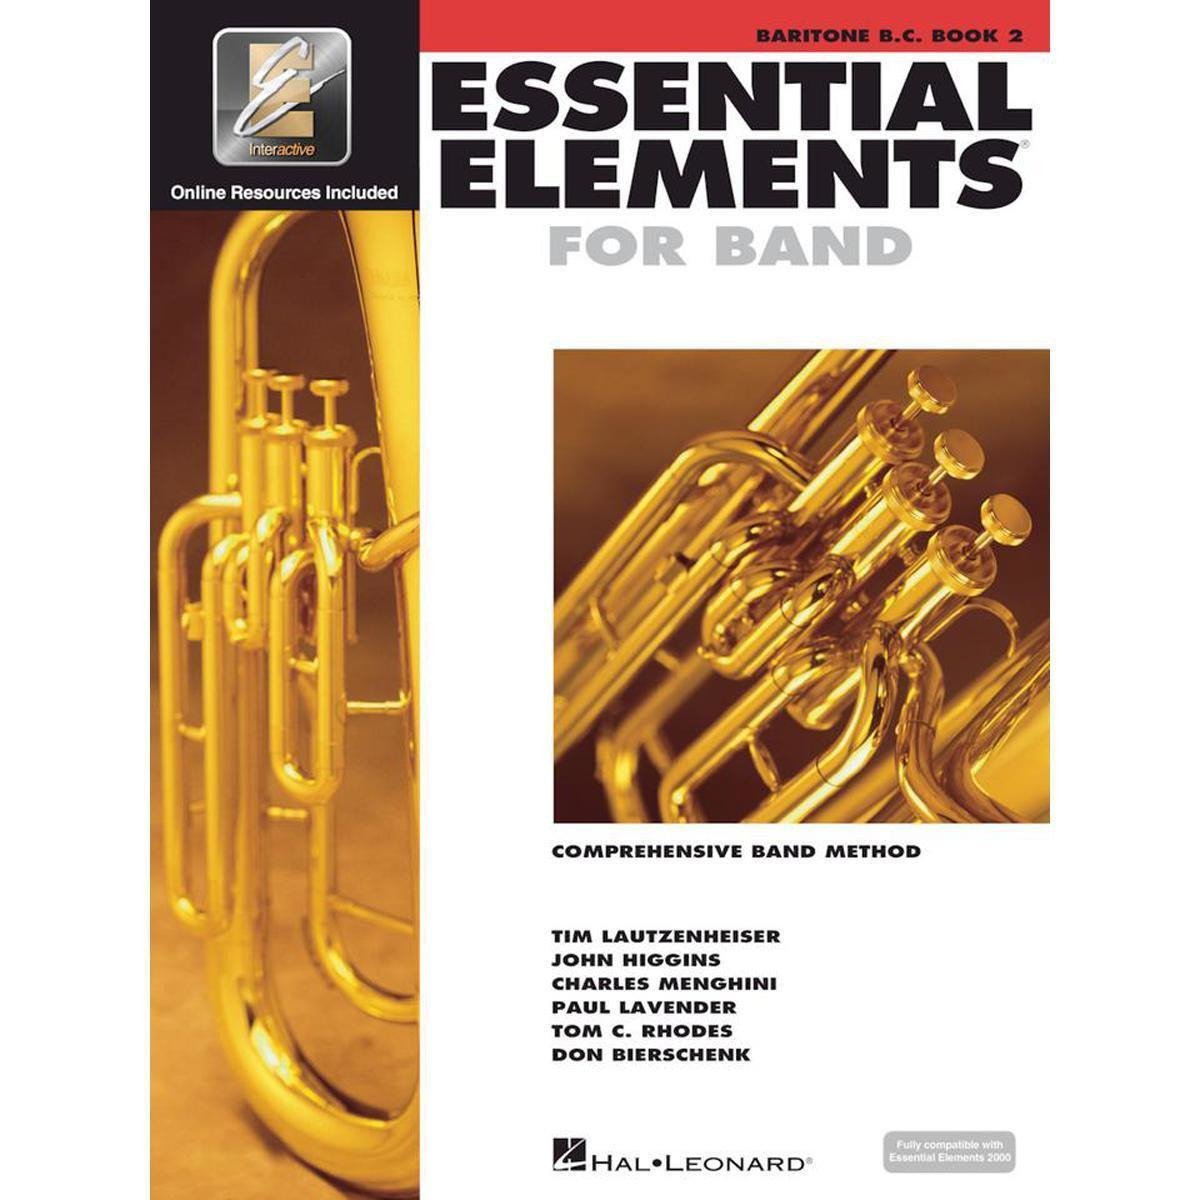 Essential Elements for Band Book 2-Baritone B.C.-Andy's Music